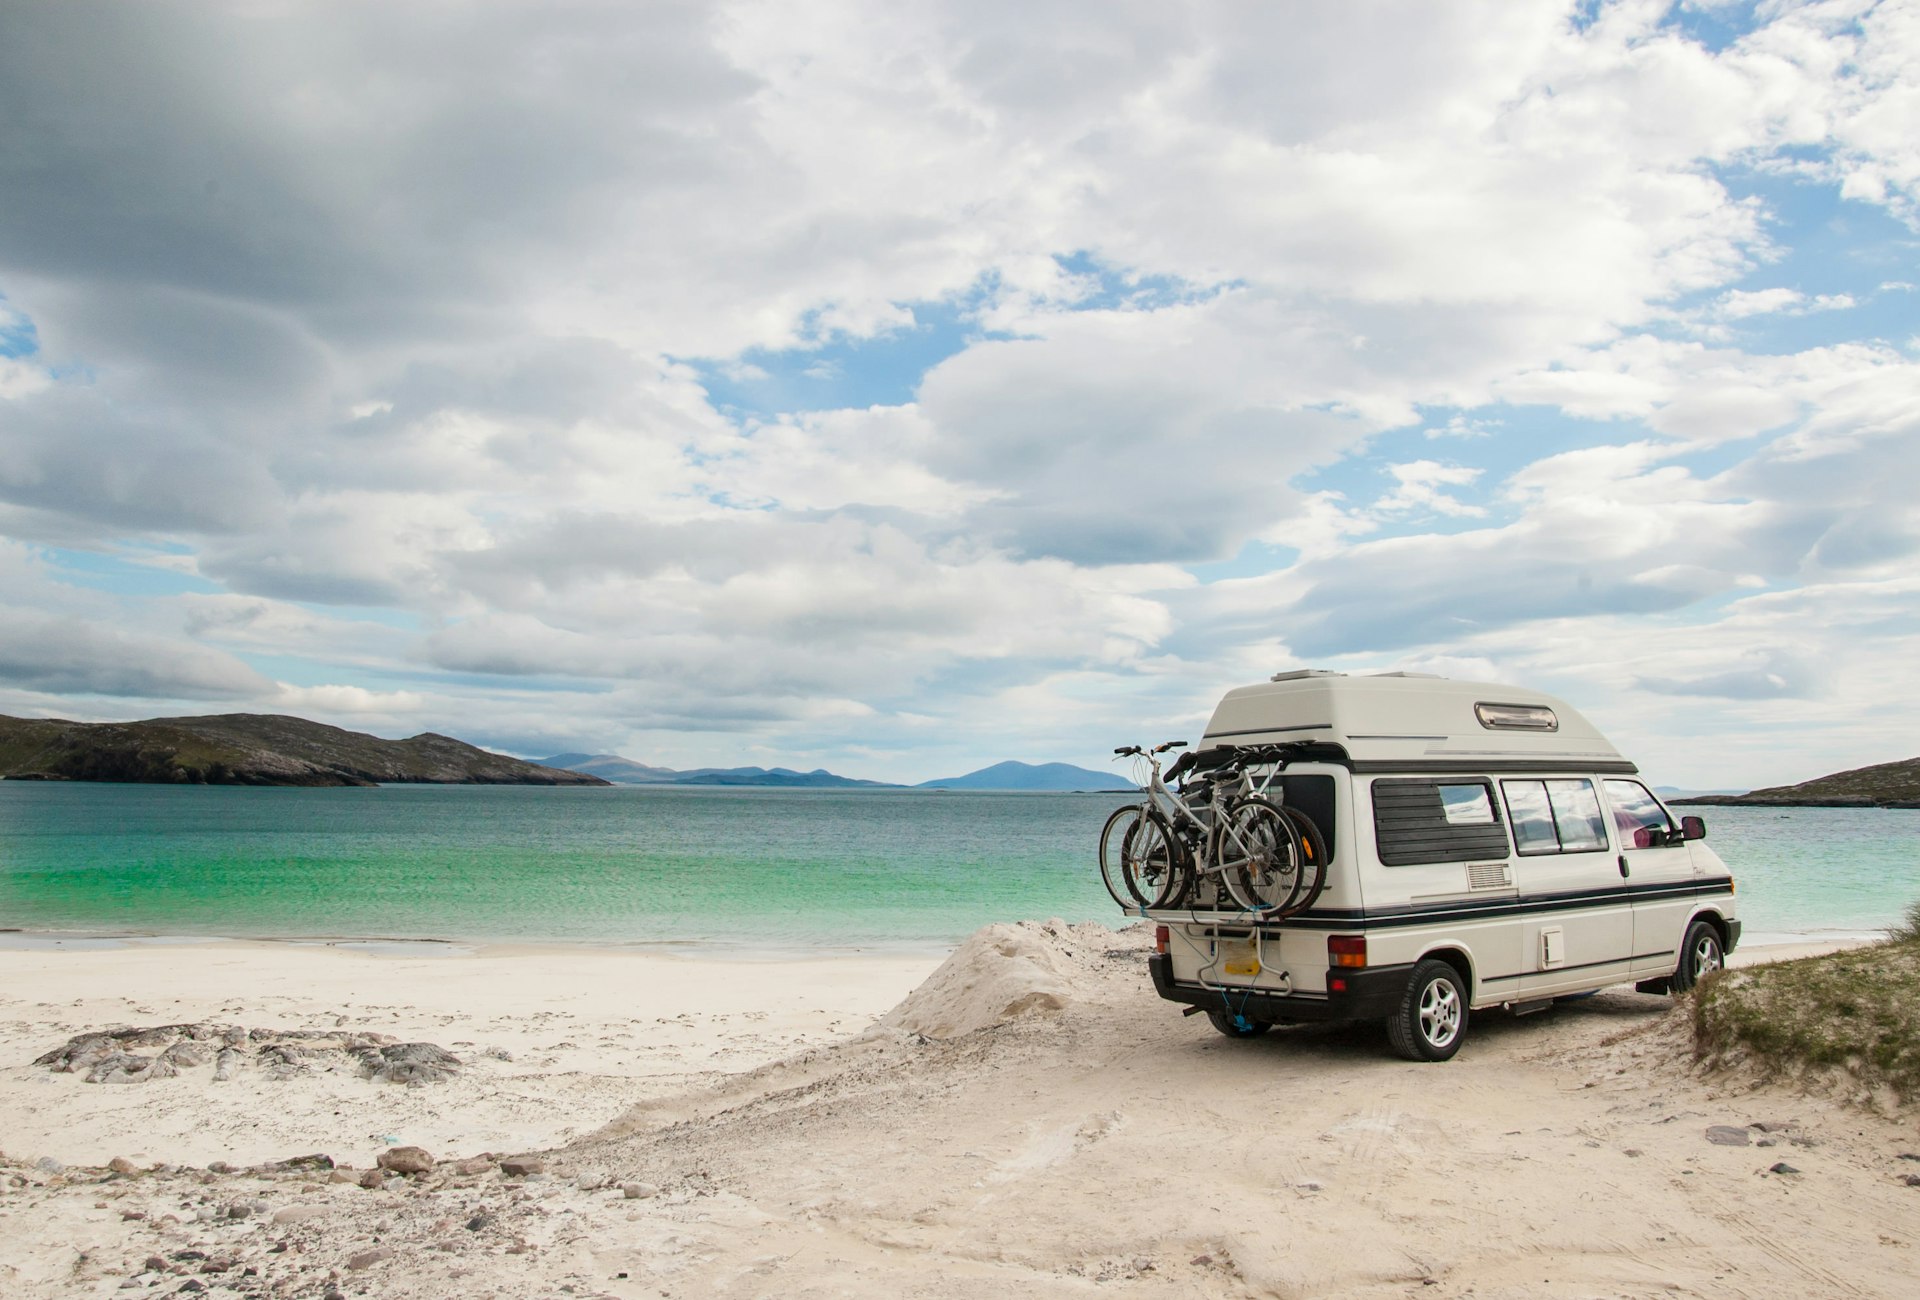 Camper van parked on a beach in the Isle of Lewis, Outer Hebrides, Scotland, UK.